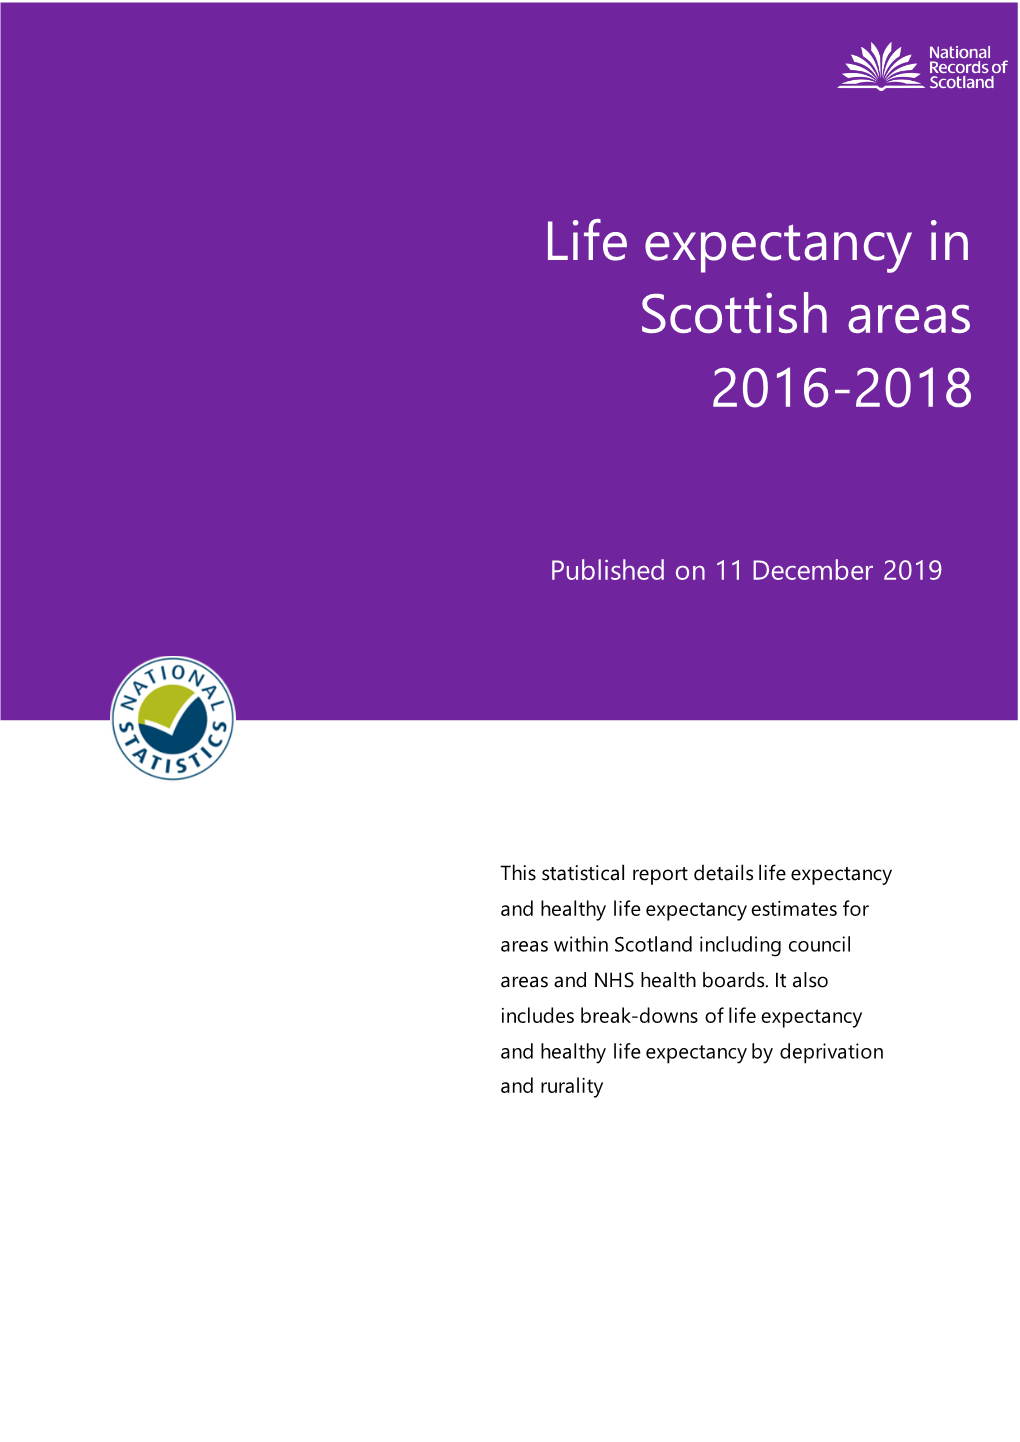 Life Expectancy in Scottish Areas 2016-2018